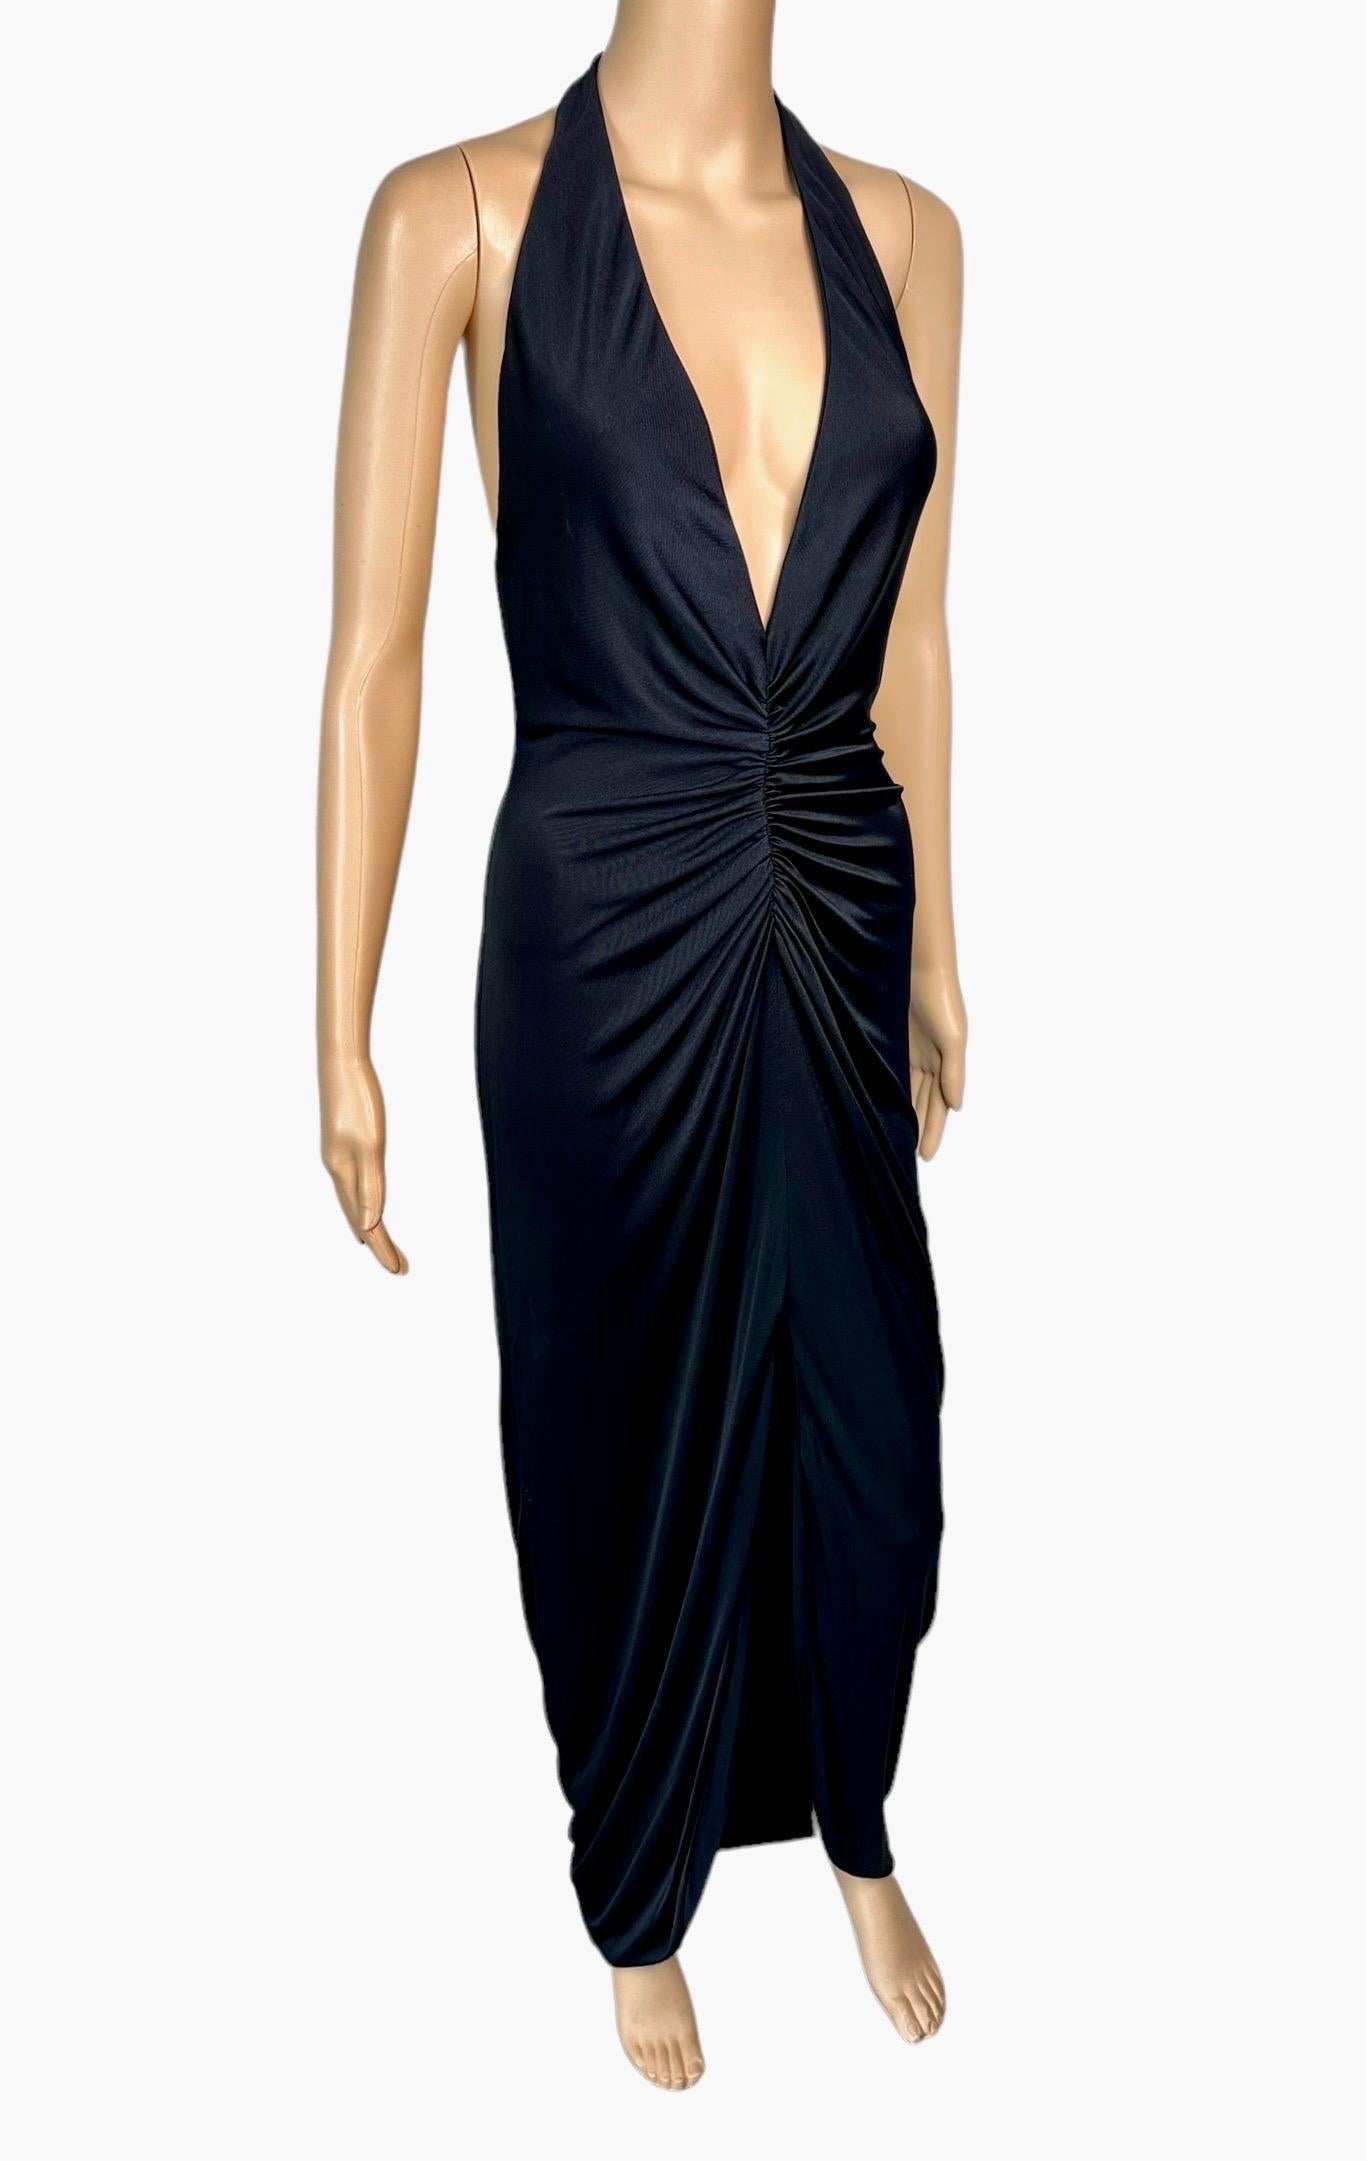 Women's Versace S/S 2005 Runway Plunging Hi-Low Ruched Open Back Evening Dress Gown For Sale